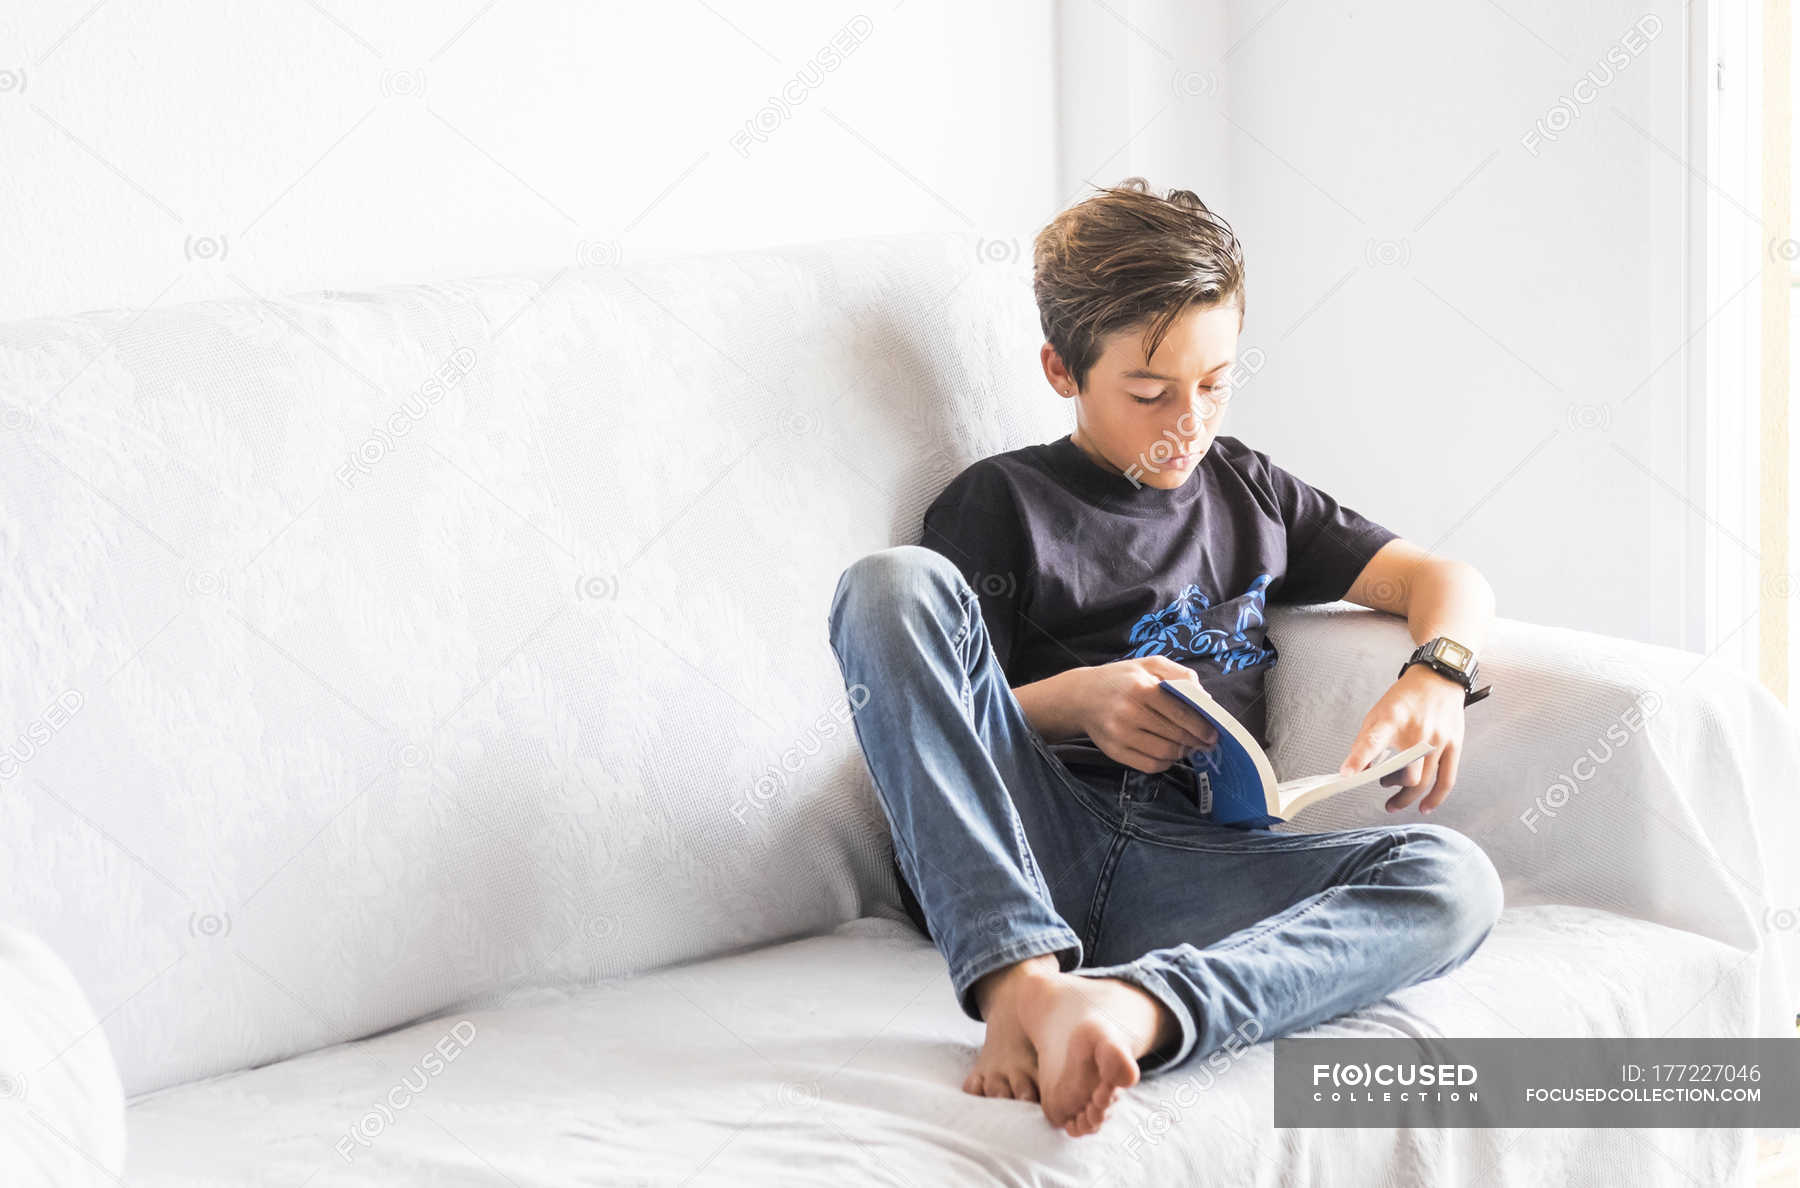 Boy Sitting On A White Couch Reading A Book Male Looking Down